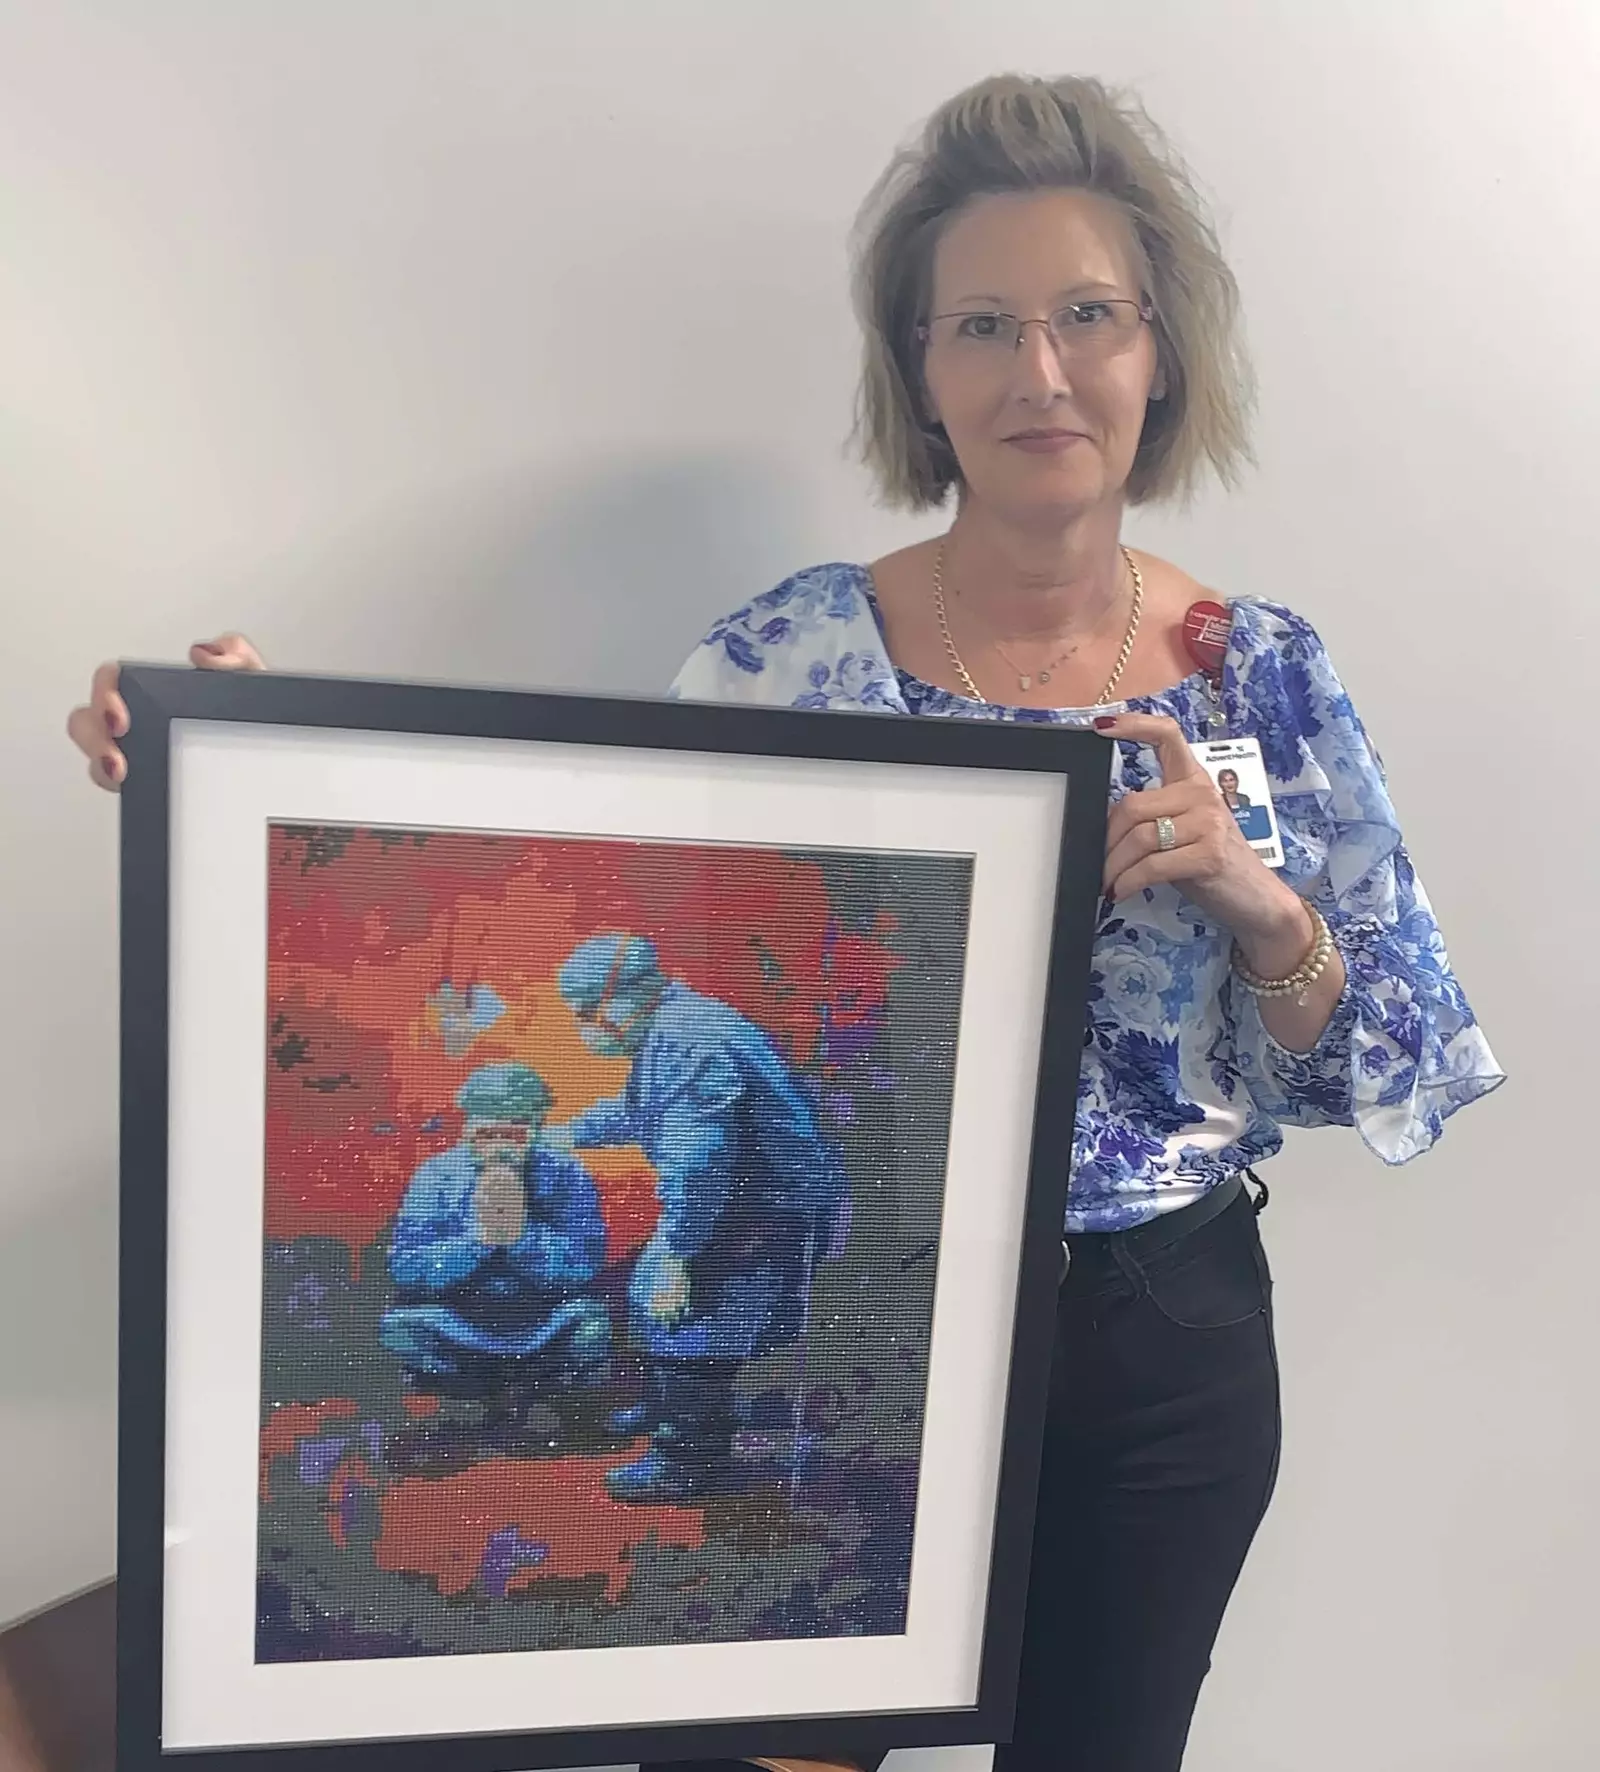 Claudia Colache Klein holding one of her art pieces